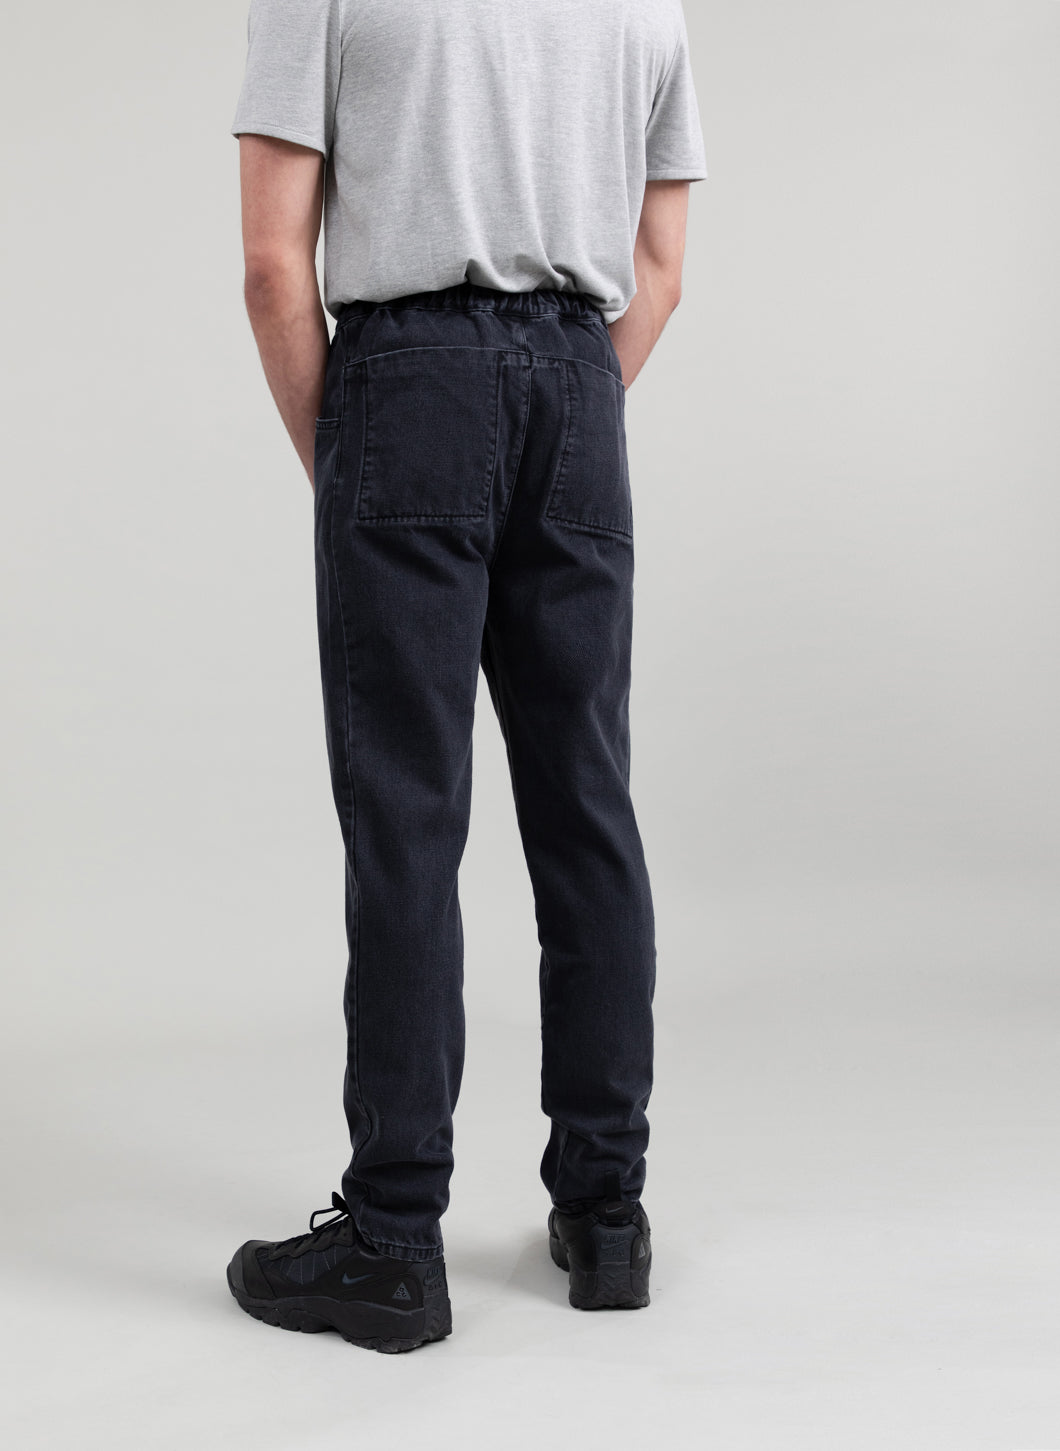 5-Pocket Pants with Front Cuts in Black Denim